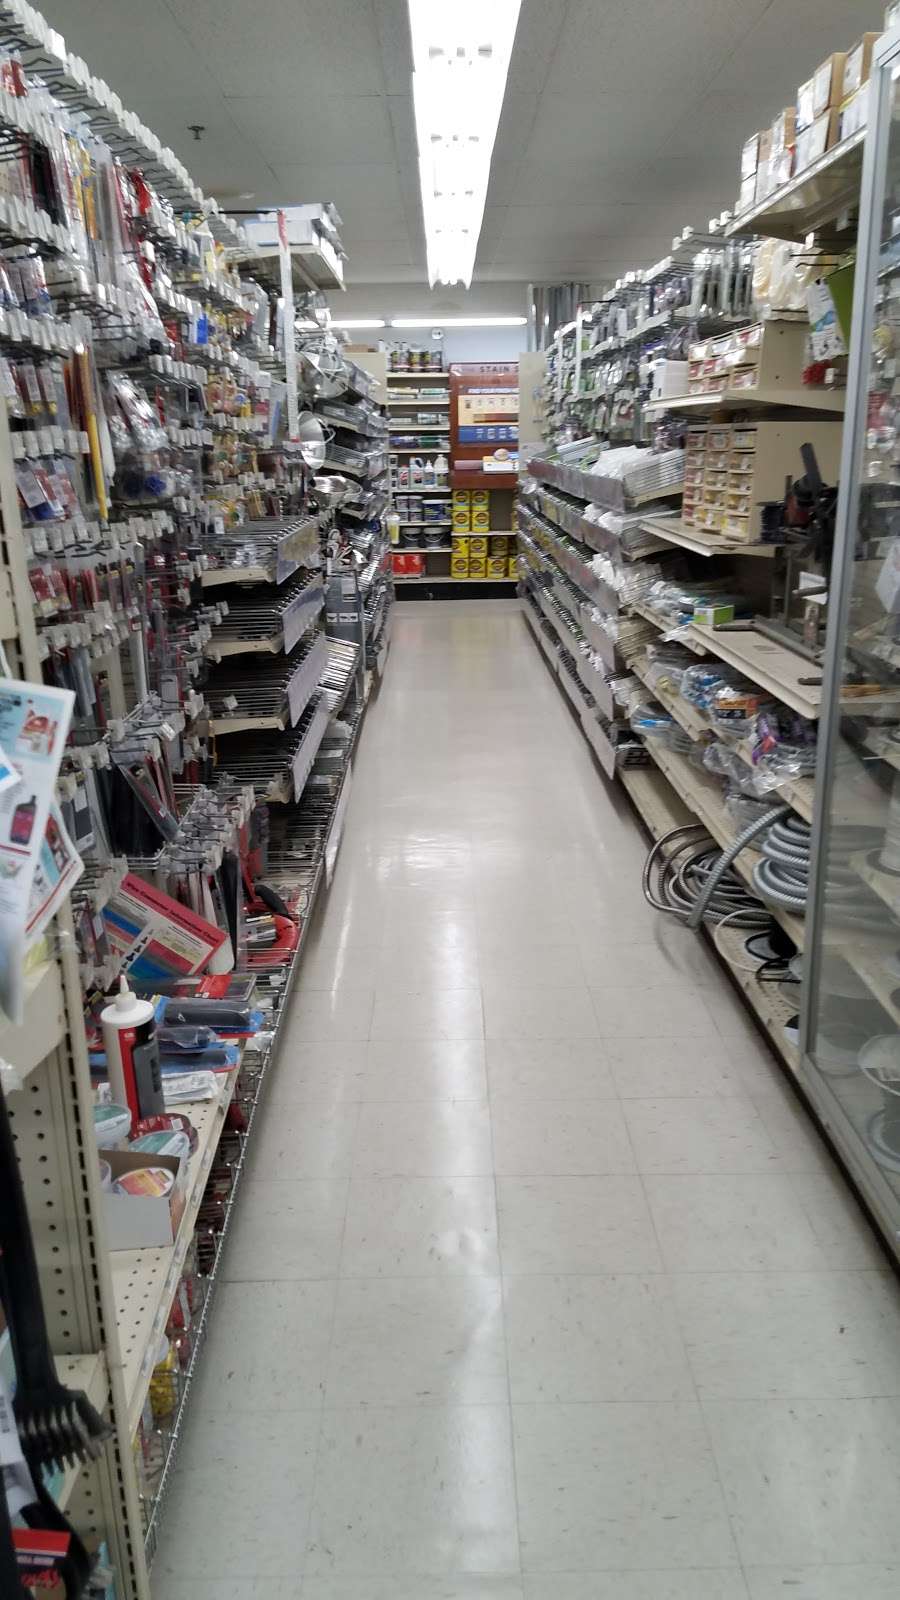 Gordon S Ace Hardware Harlem Foster 7230 W Foster Ave Chicago Il 60656 Usa